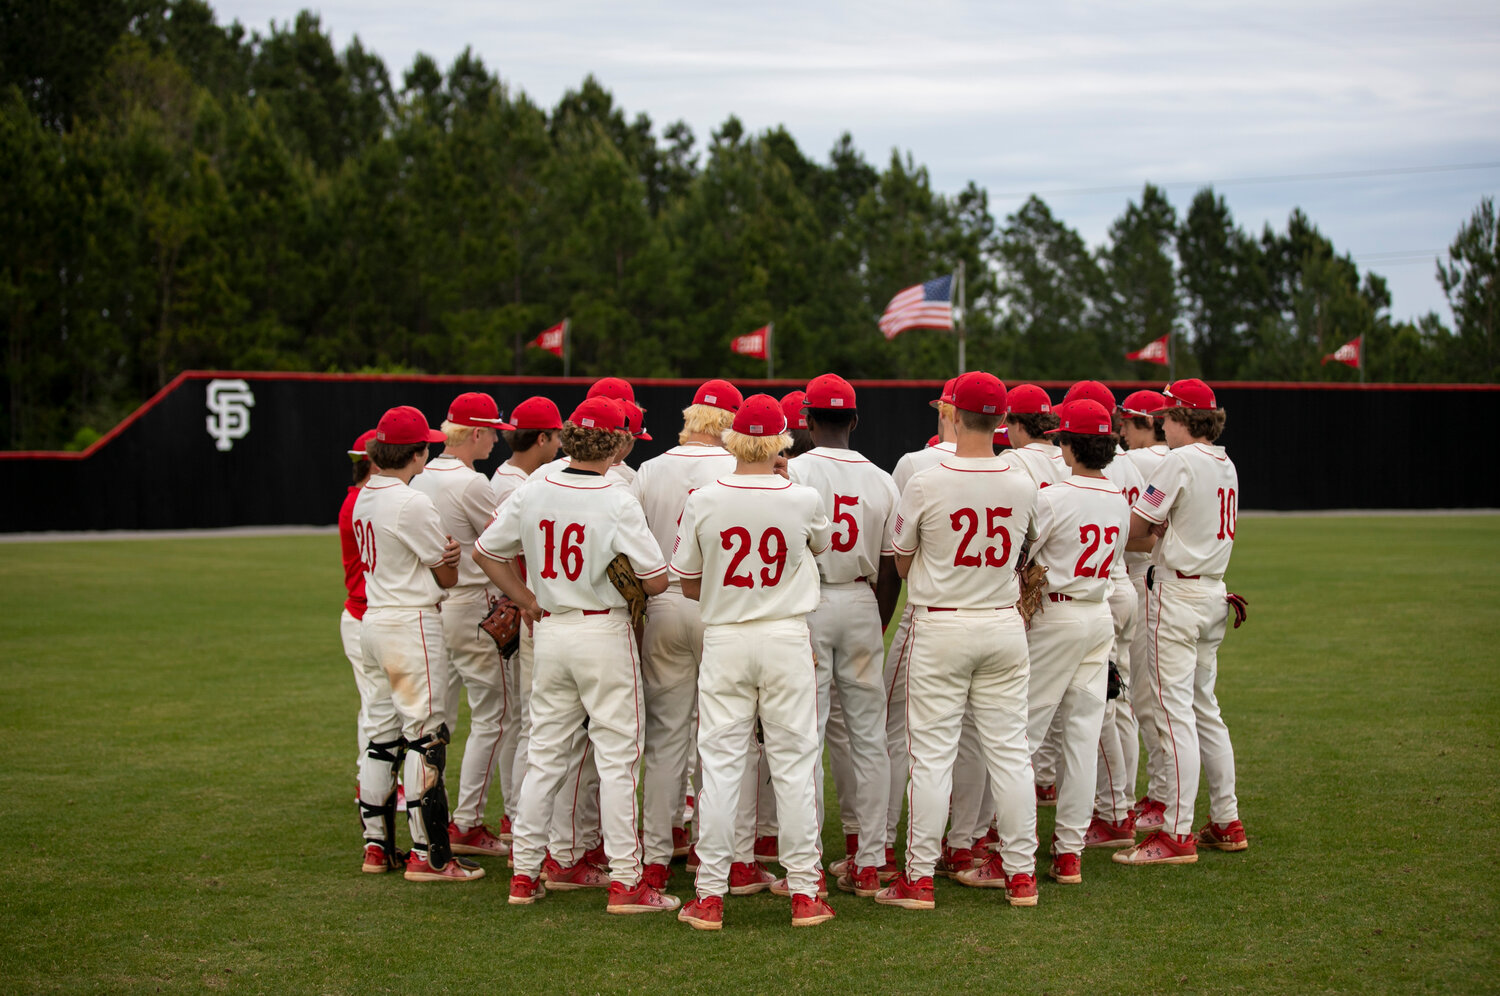 The Spanish Fort Toros gather in the outfield before their Class 6A first-round playoff series against the McAdory Yellowjackets April 21 at home. Wednesday at Jacksonville State served as the end of the road as Spanish Fort was swept by Oxford in the AHSAA state championship series in the Toros’ first title appearance since 2014.